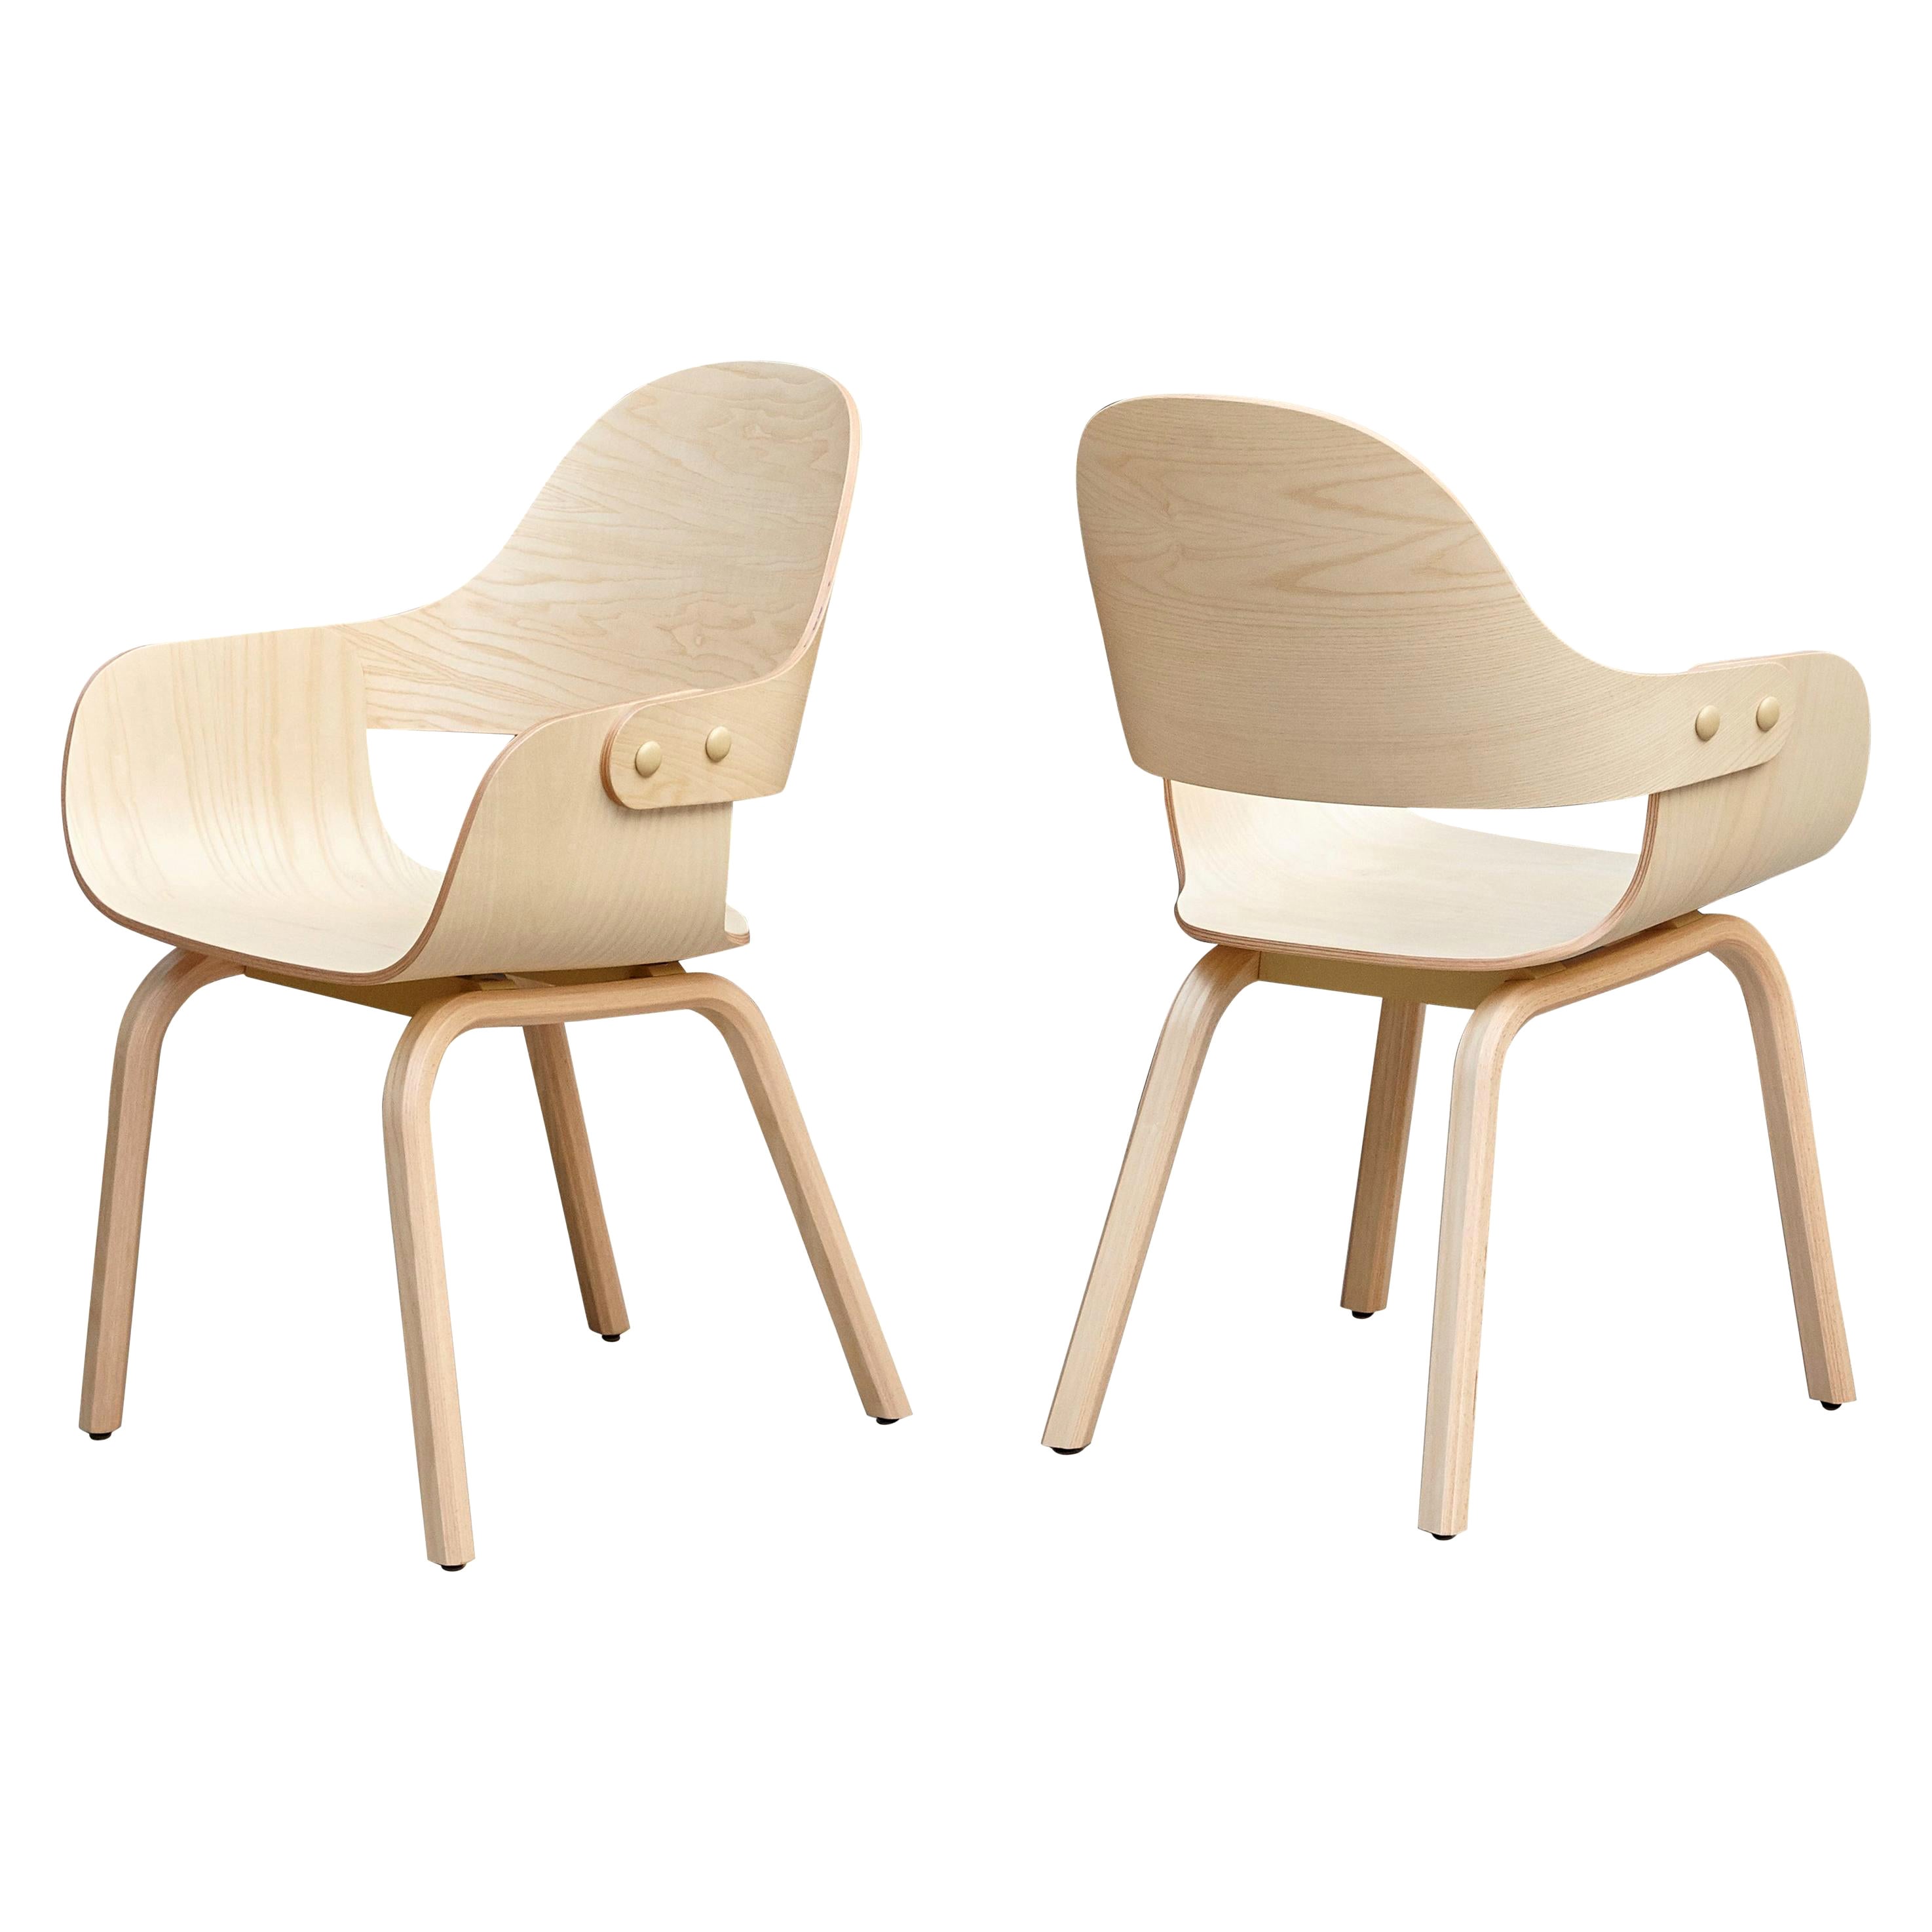 Pair of Jaime Hayon, Contemporary, Wood Chair Showtime Nude by BD Barcelona